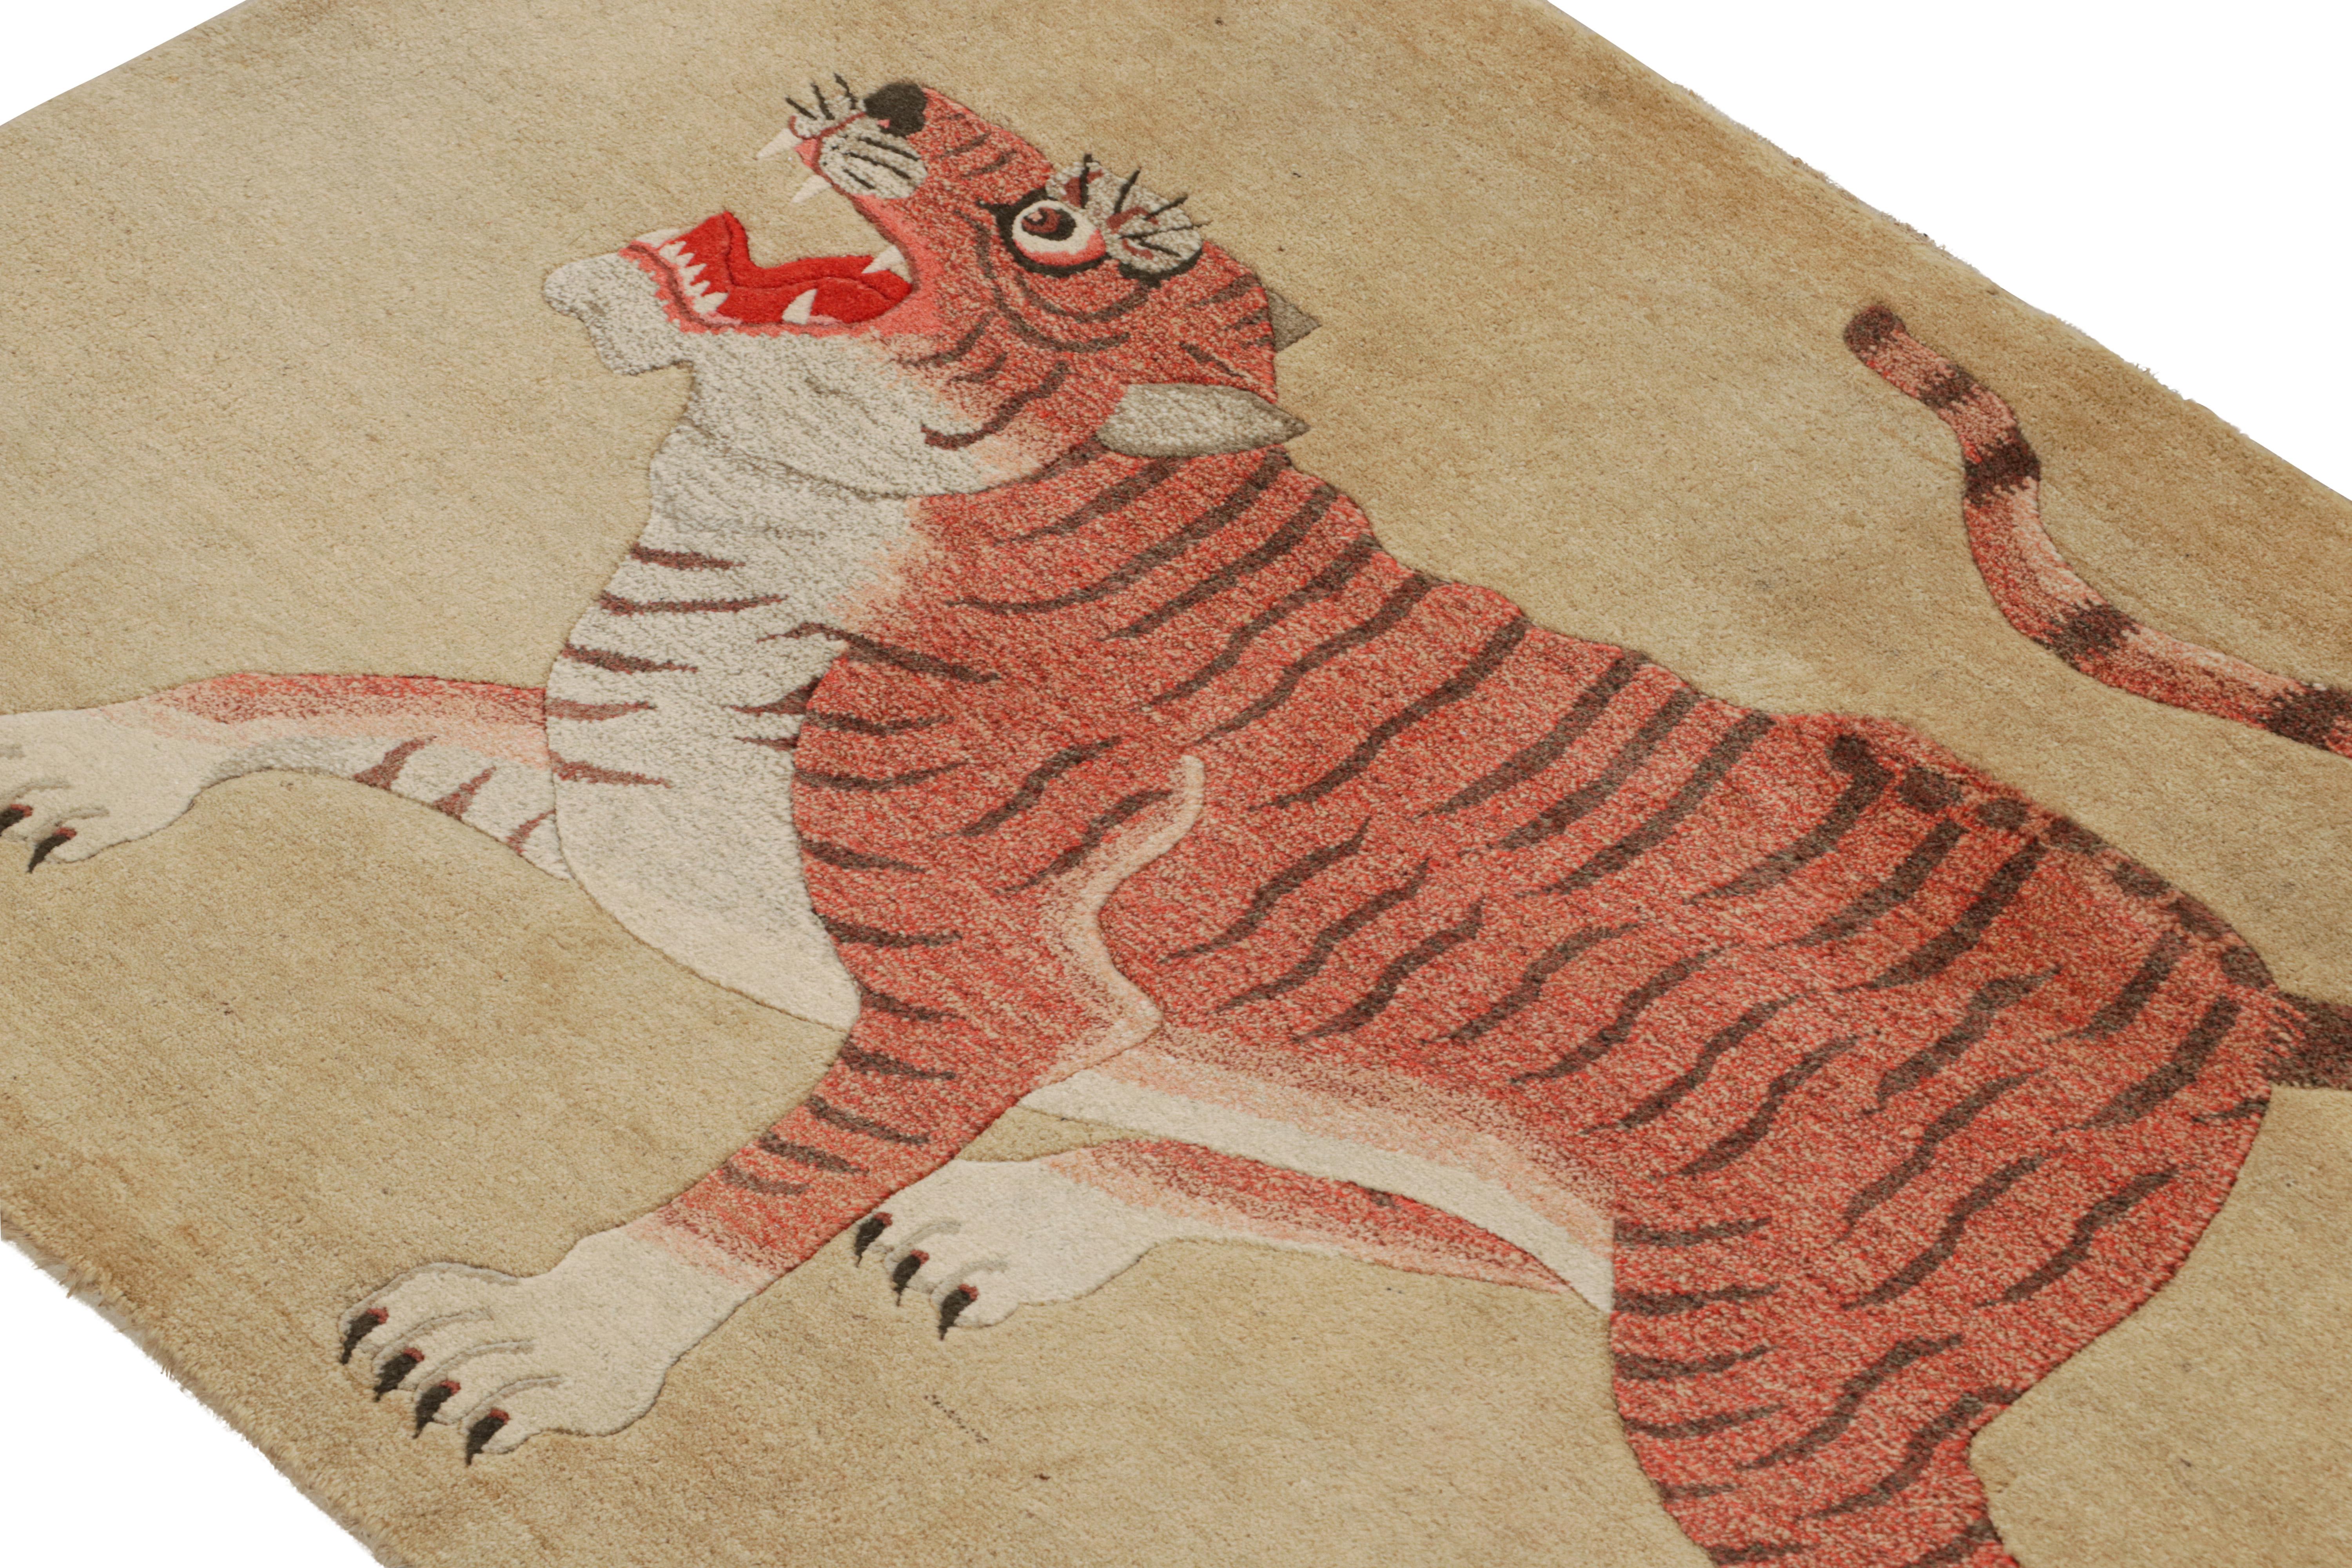 Hand-Knotted Antique Tiger Runner Rug in Beige-Brown with Red Pictorial, from Rug & Kilim For Sale